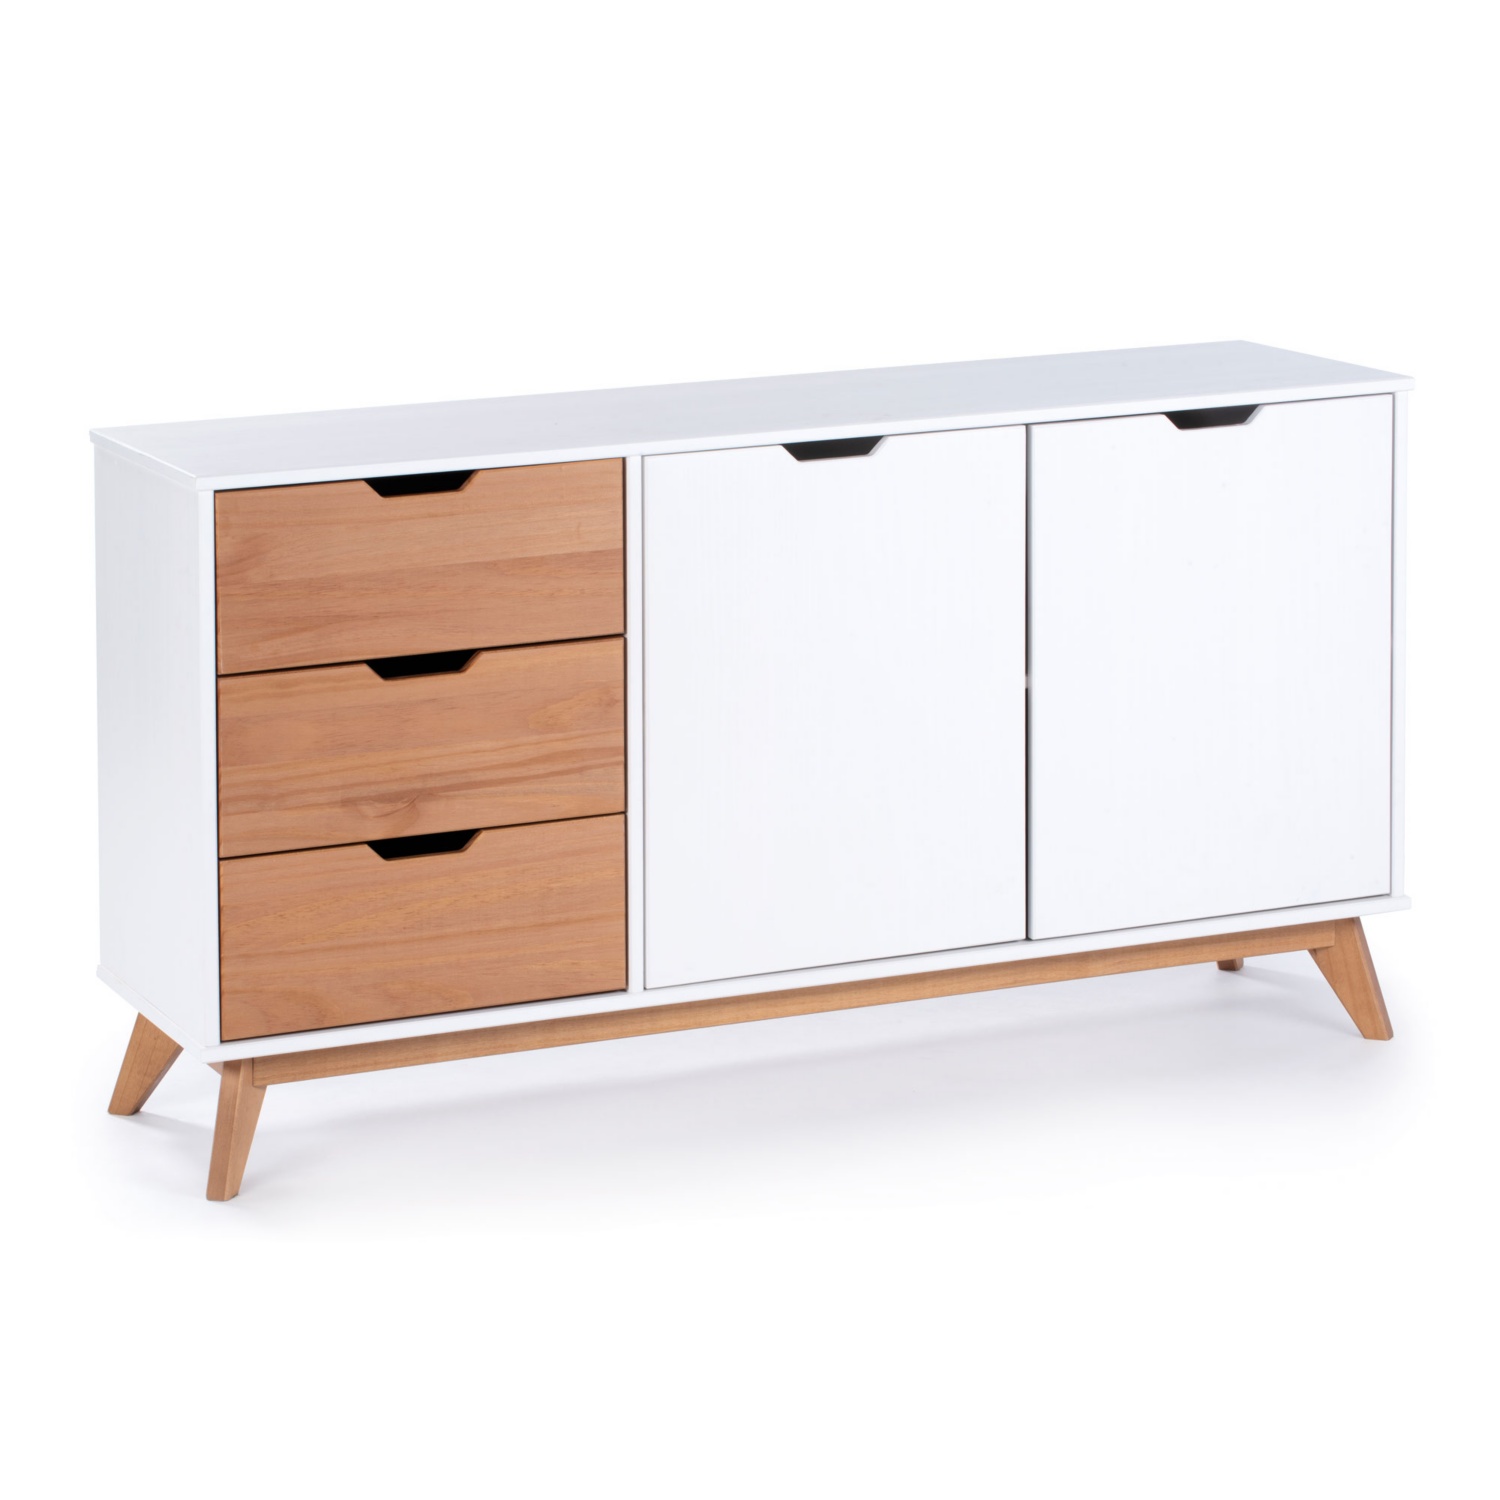 LIVING STYLE Sideboard